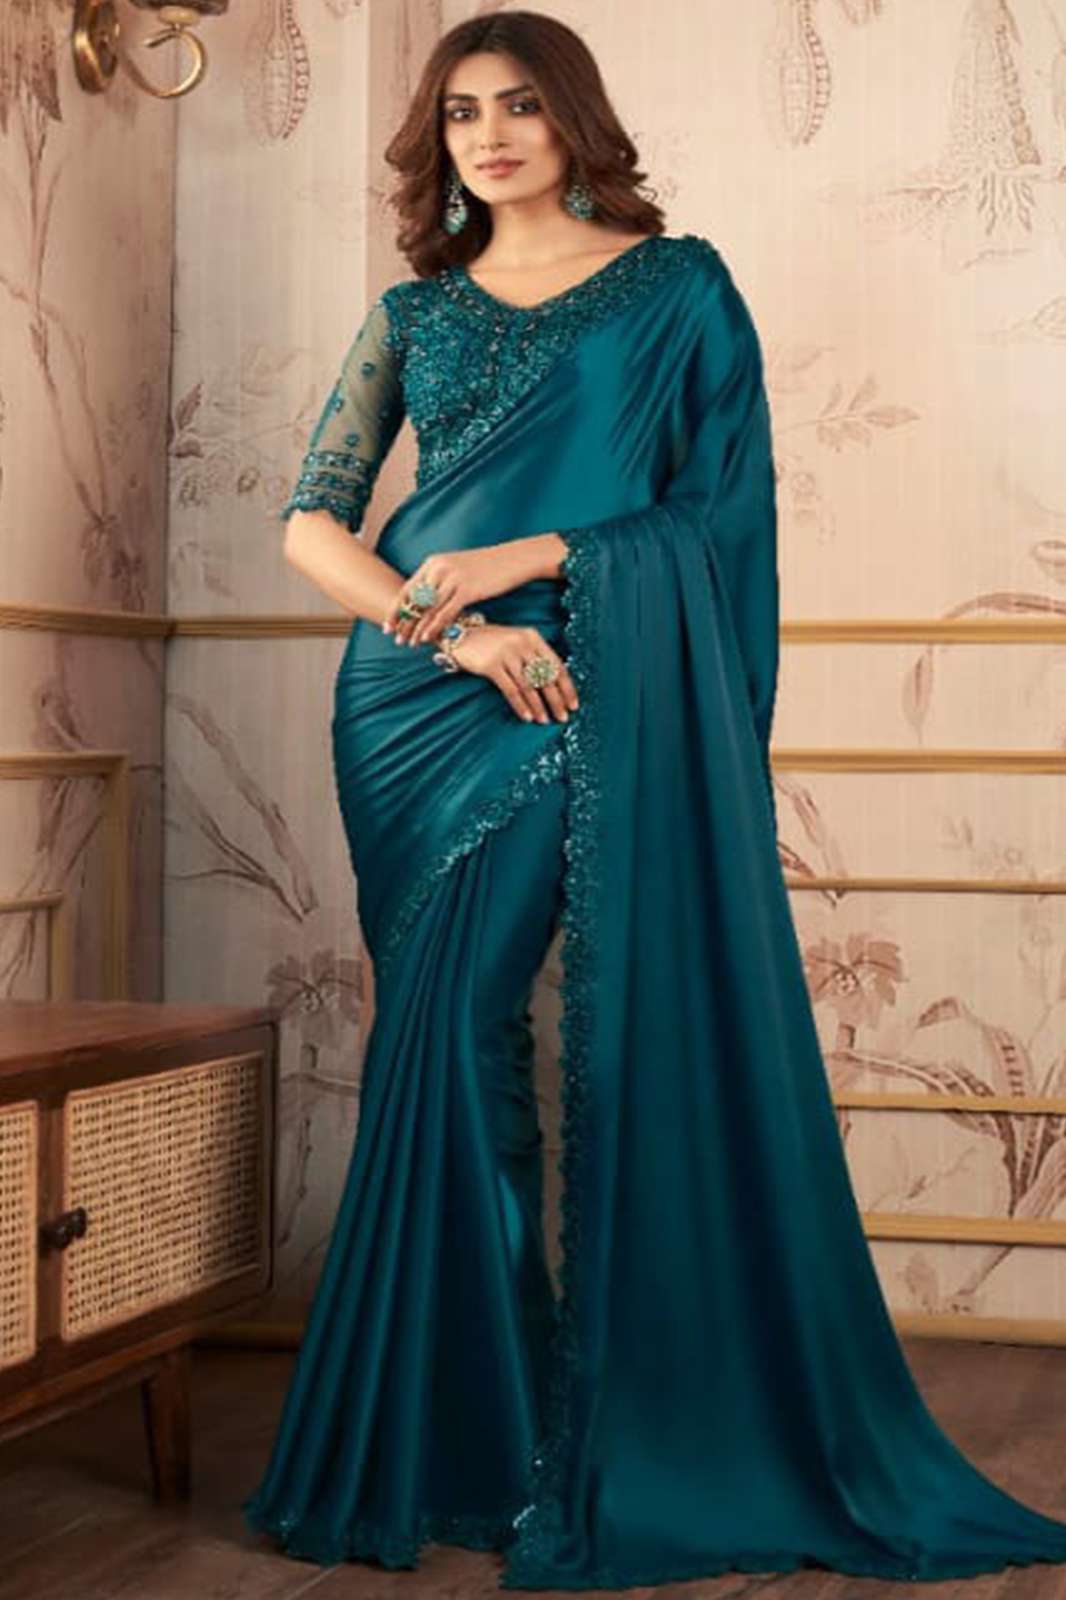 ANMOL CREATION KAINA GORGETTE DIGITAL SHIMMER SAREE IN BEAUTIFUL COLORS